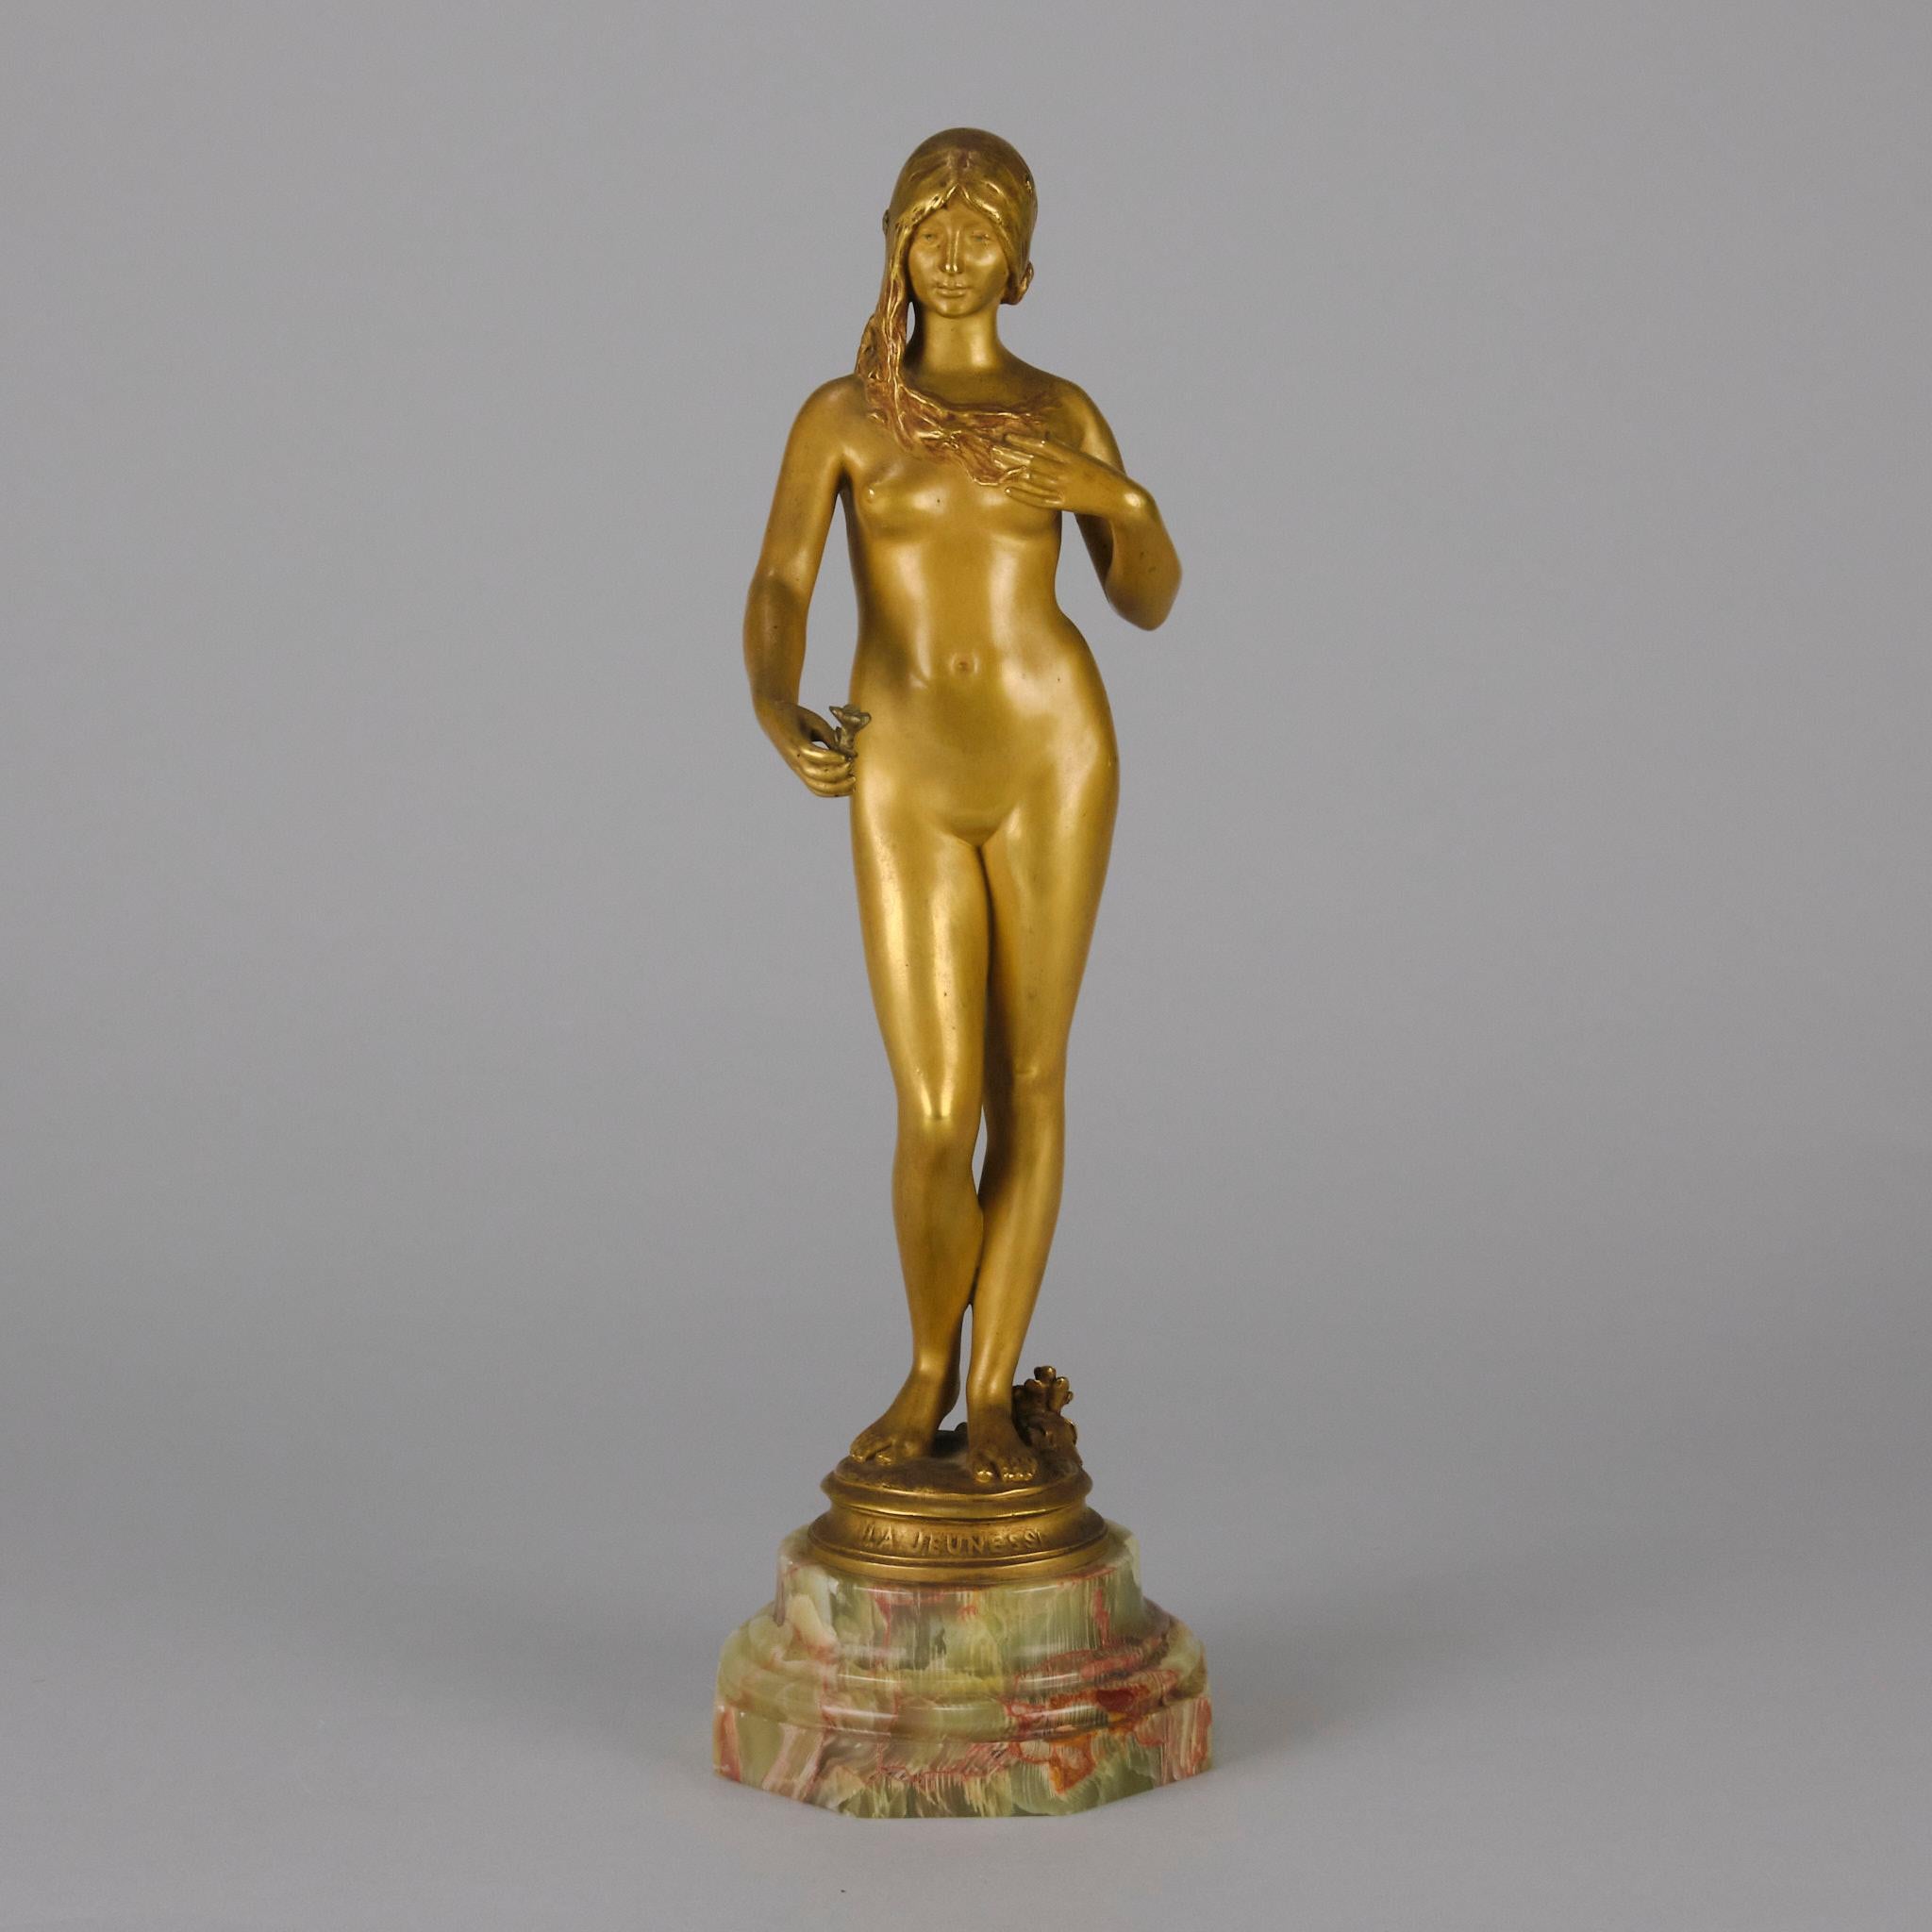 A delightful Art Nouveau early 20th Century gilt bronze figure of a very beautiful young lady holding a flower in her right hand, the surface of the bronze exhibiting fine detail and finish. Raised on a shaped onyx base, titled to the fore, signed